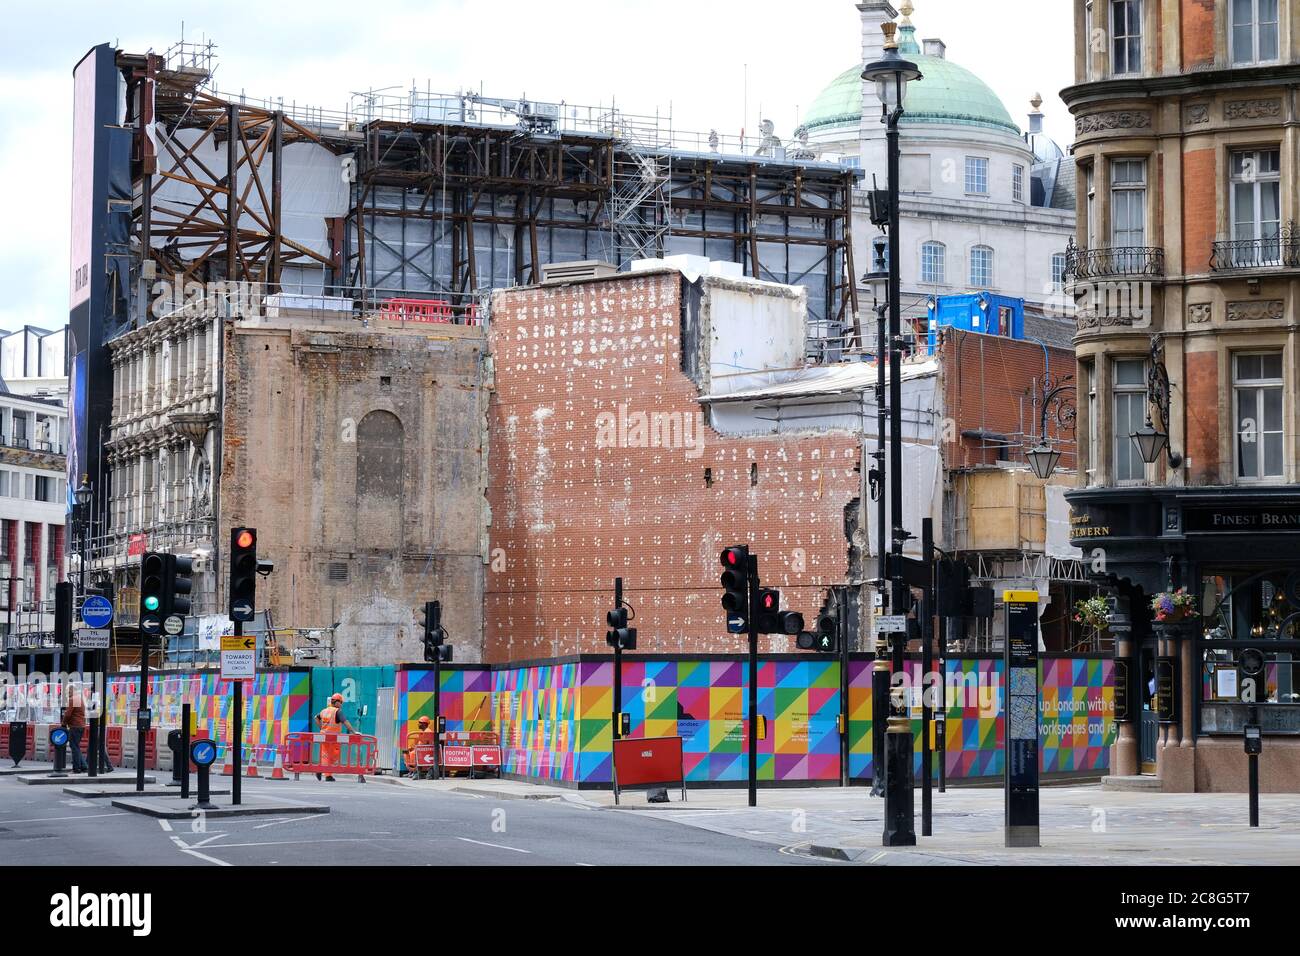 A rare view behind the Piccadilly Lights advertising screen where redevelopment work for a mixed retail and residential site is taking place. Stock Photo